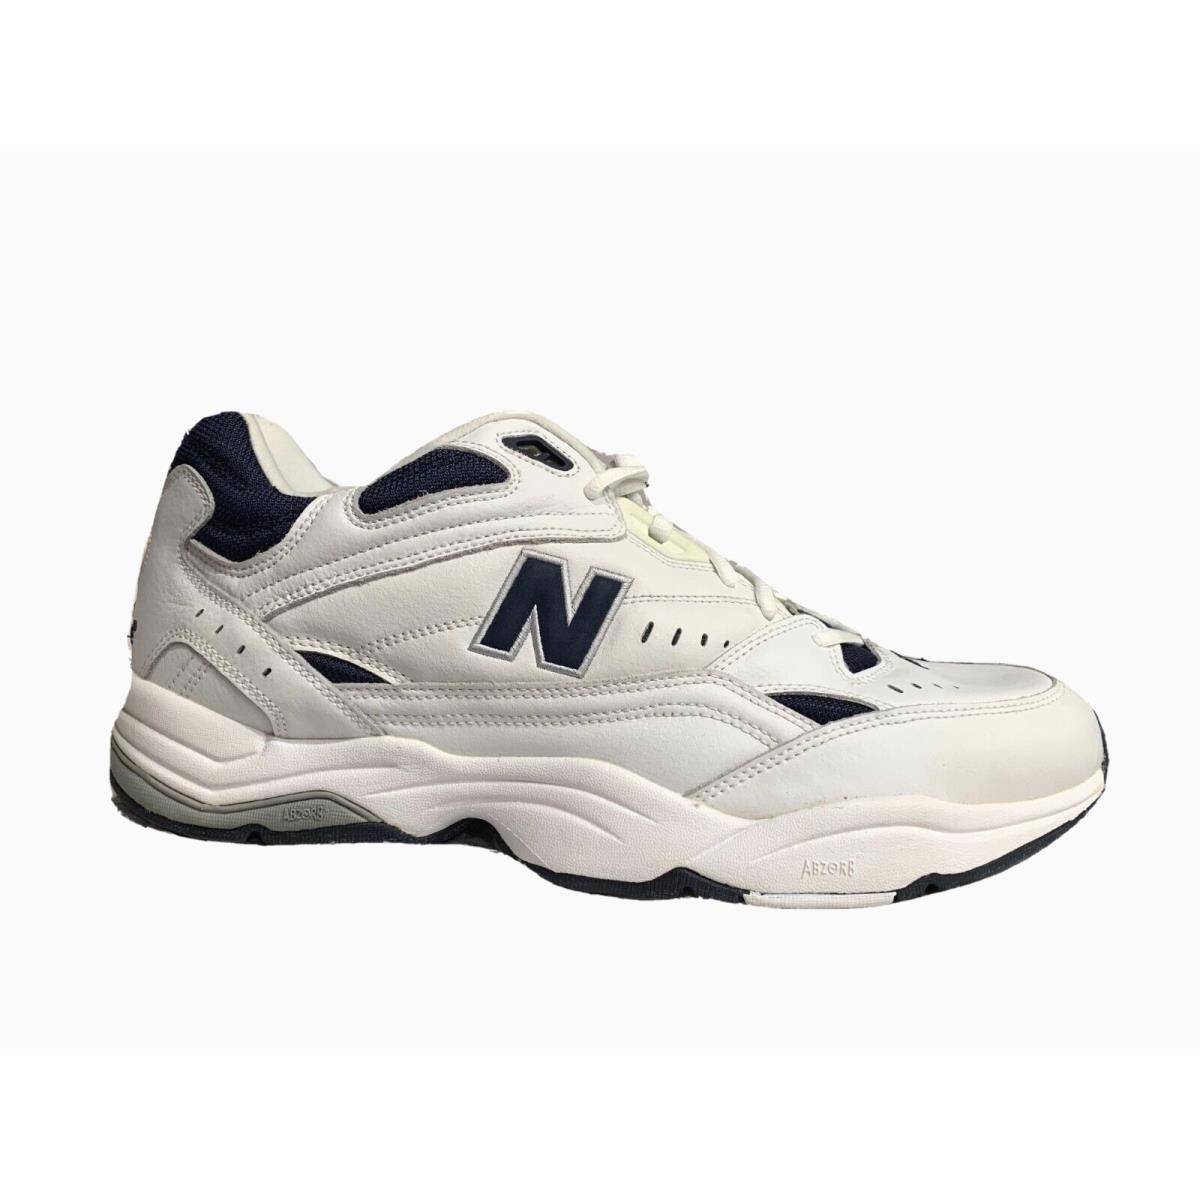 New Balance Mens MX609 WN Atletic Casual Shoes White/navy Big Size US 18M